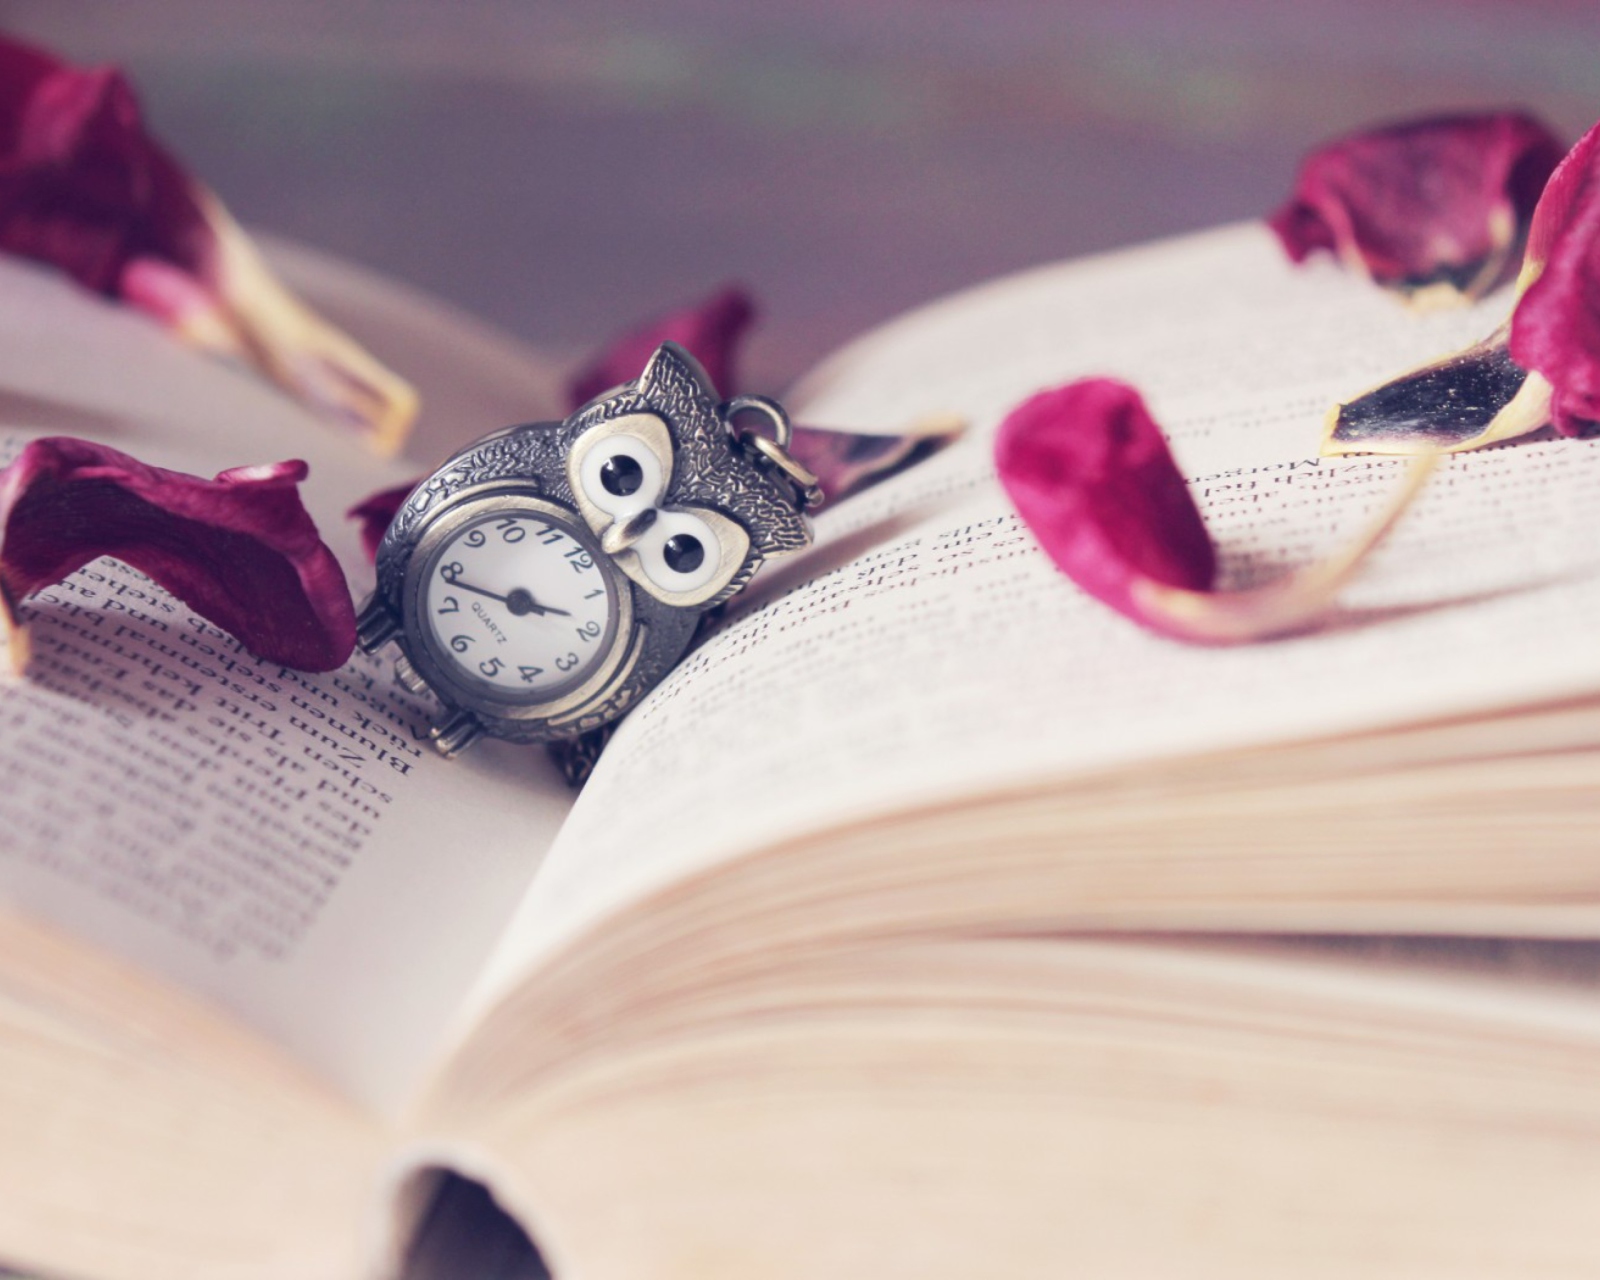 Vintage Owl Watch And Book screenshot #1 1600x1280